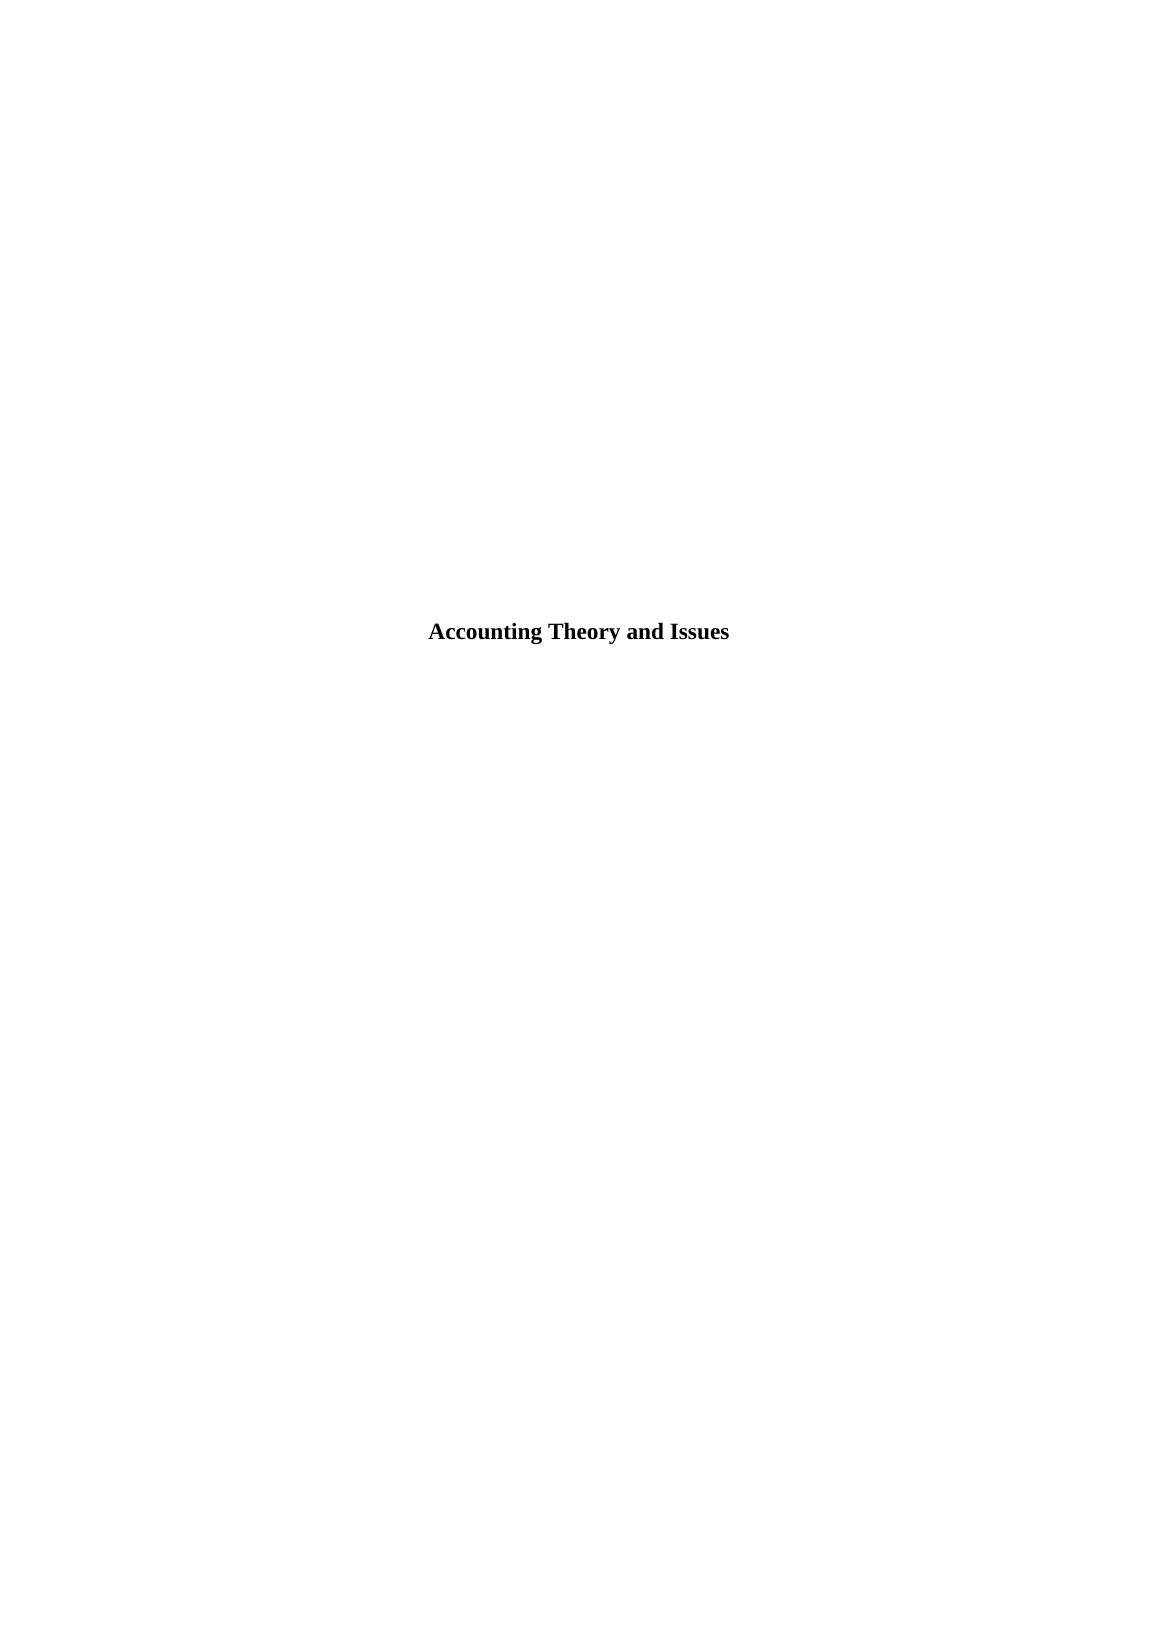 Report on Accounting Theory and Issues_1